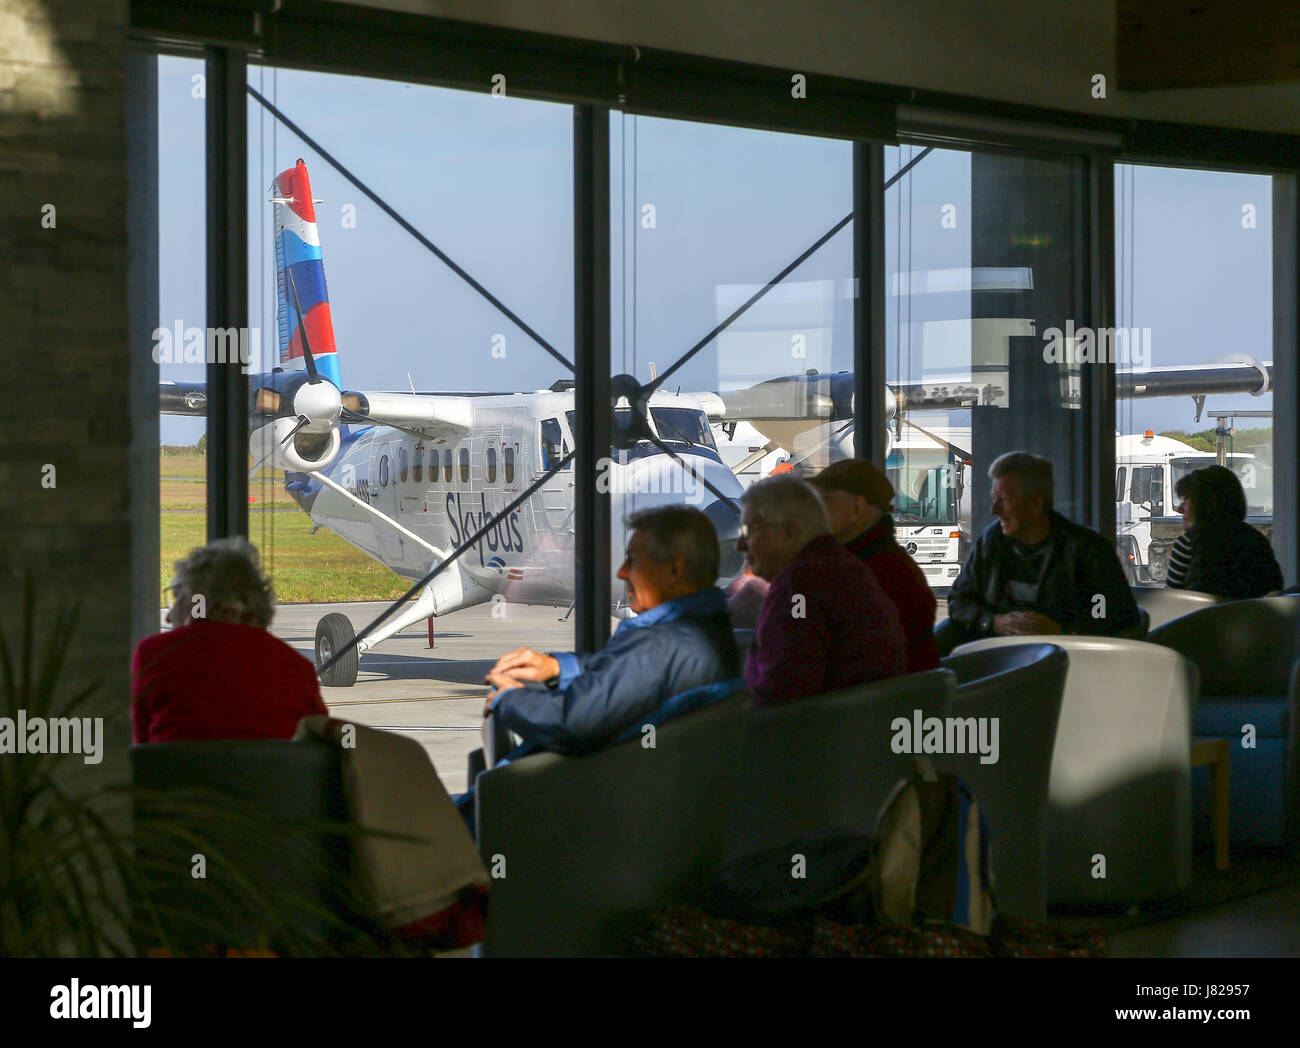 Passenger waiting area with people waiting to board a flight and a plane in the background at Land's End Airport, St. Just, Cornwall, England UK Stock Photo